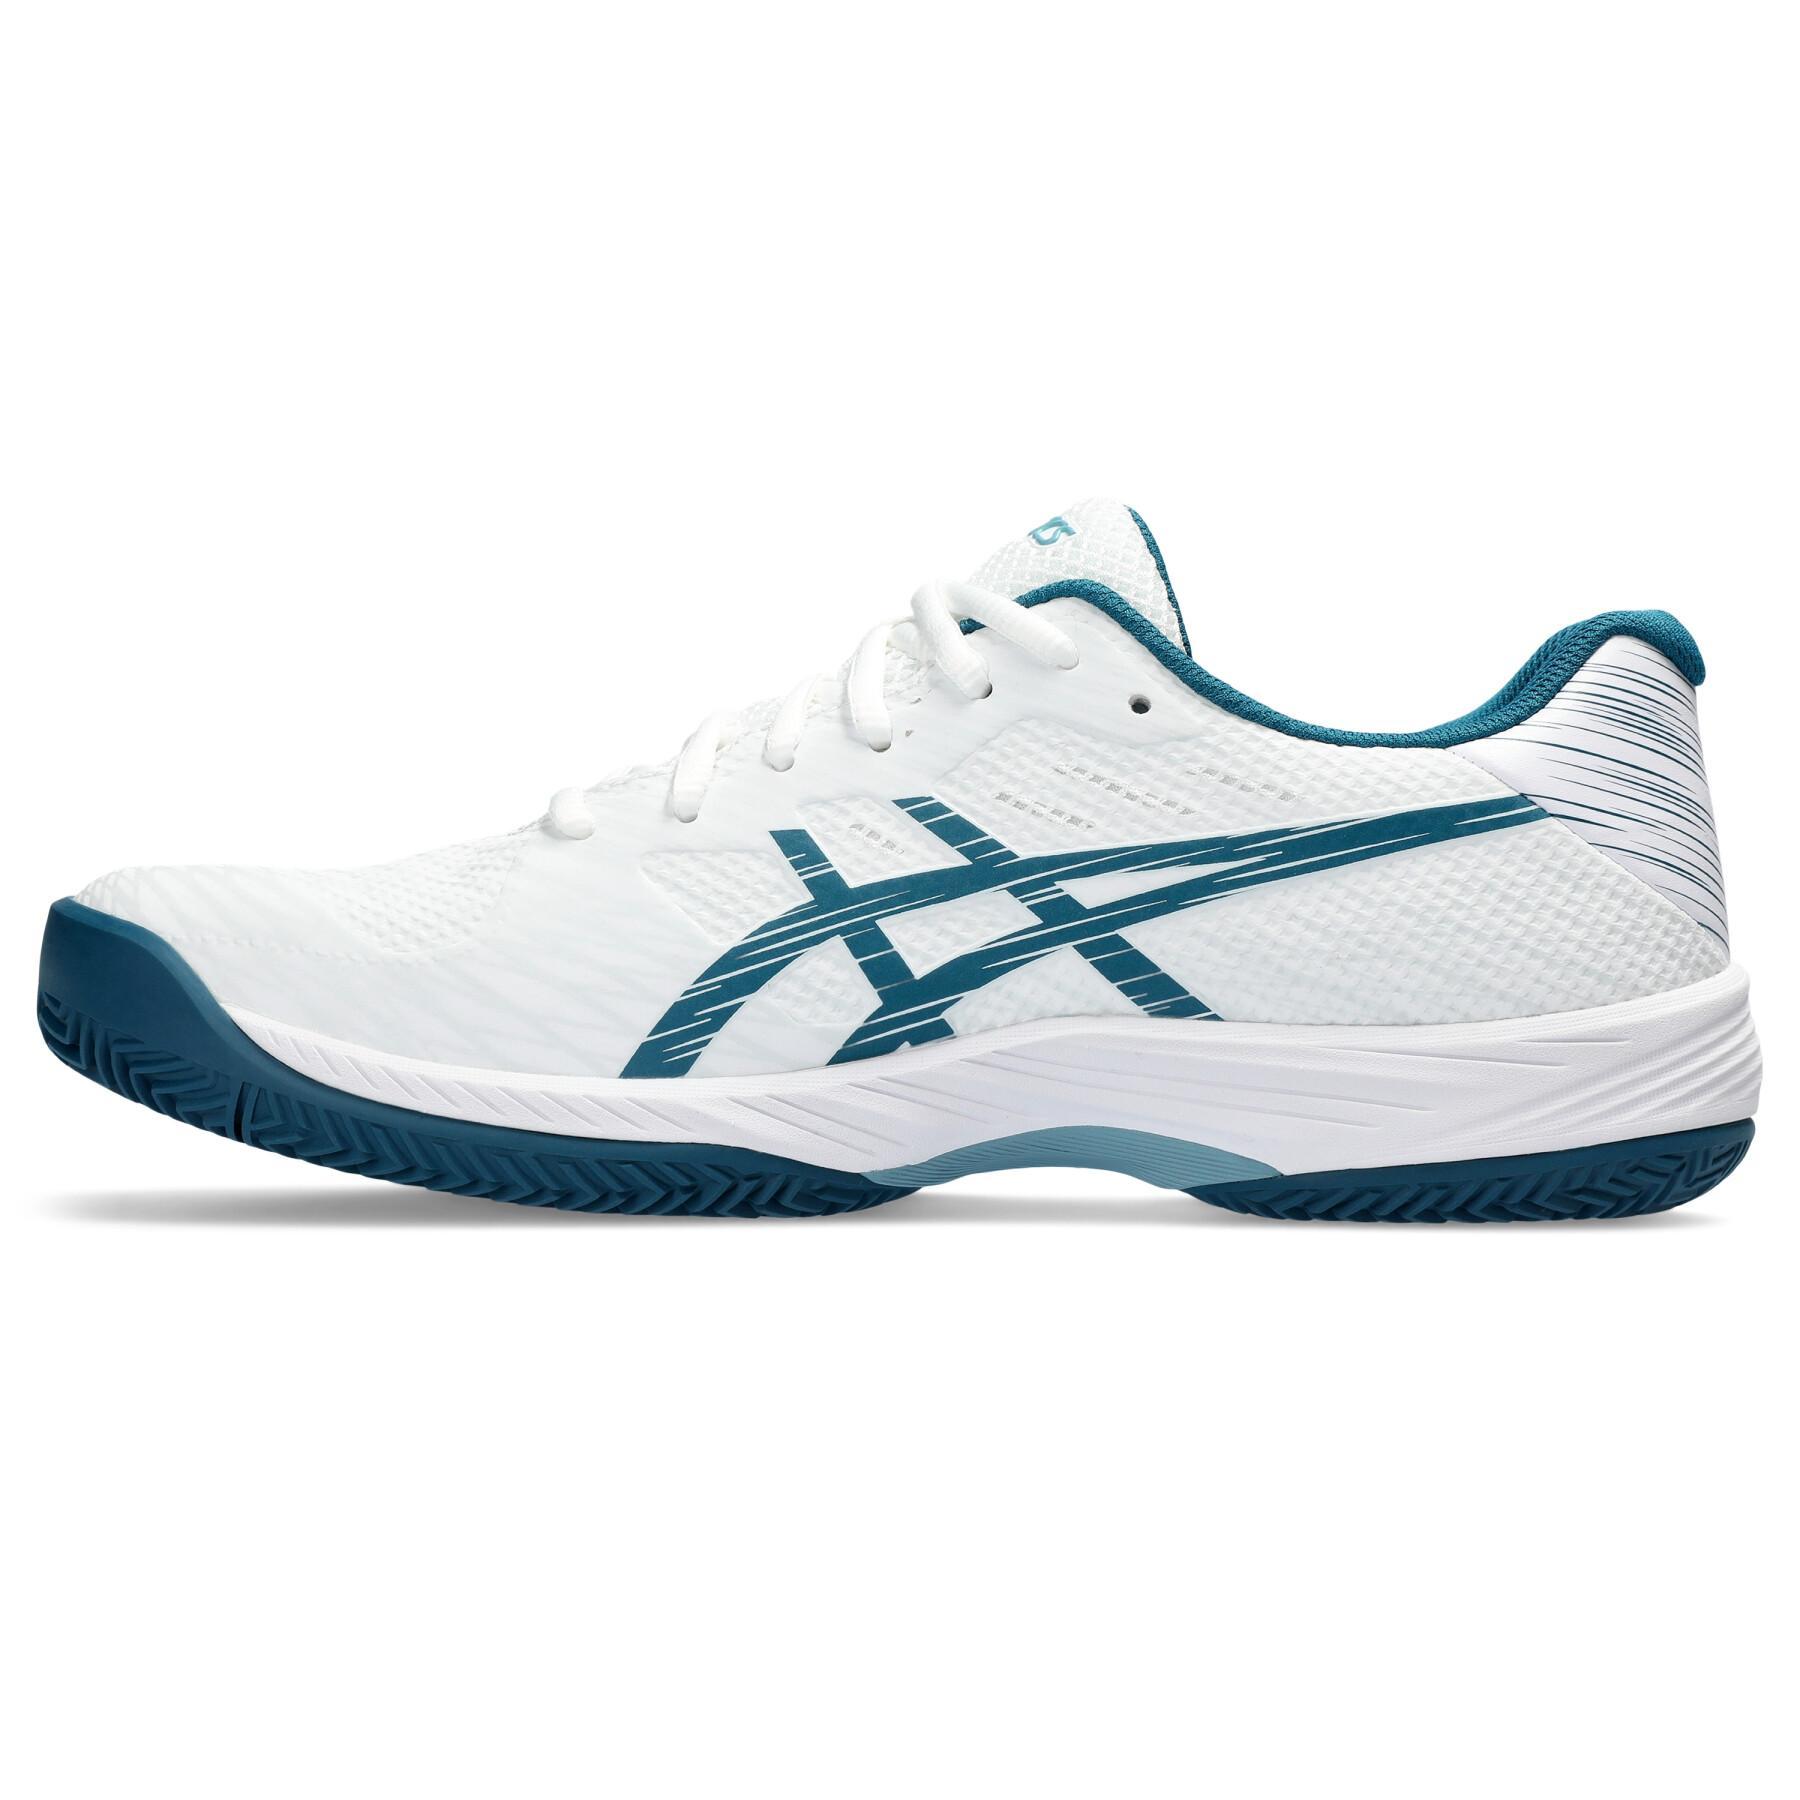 Tennis shoes Asics Gel-Game 9 Clay/OC